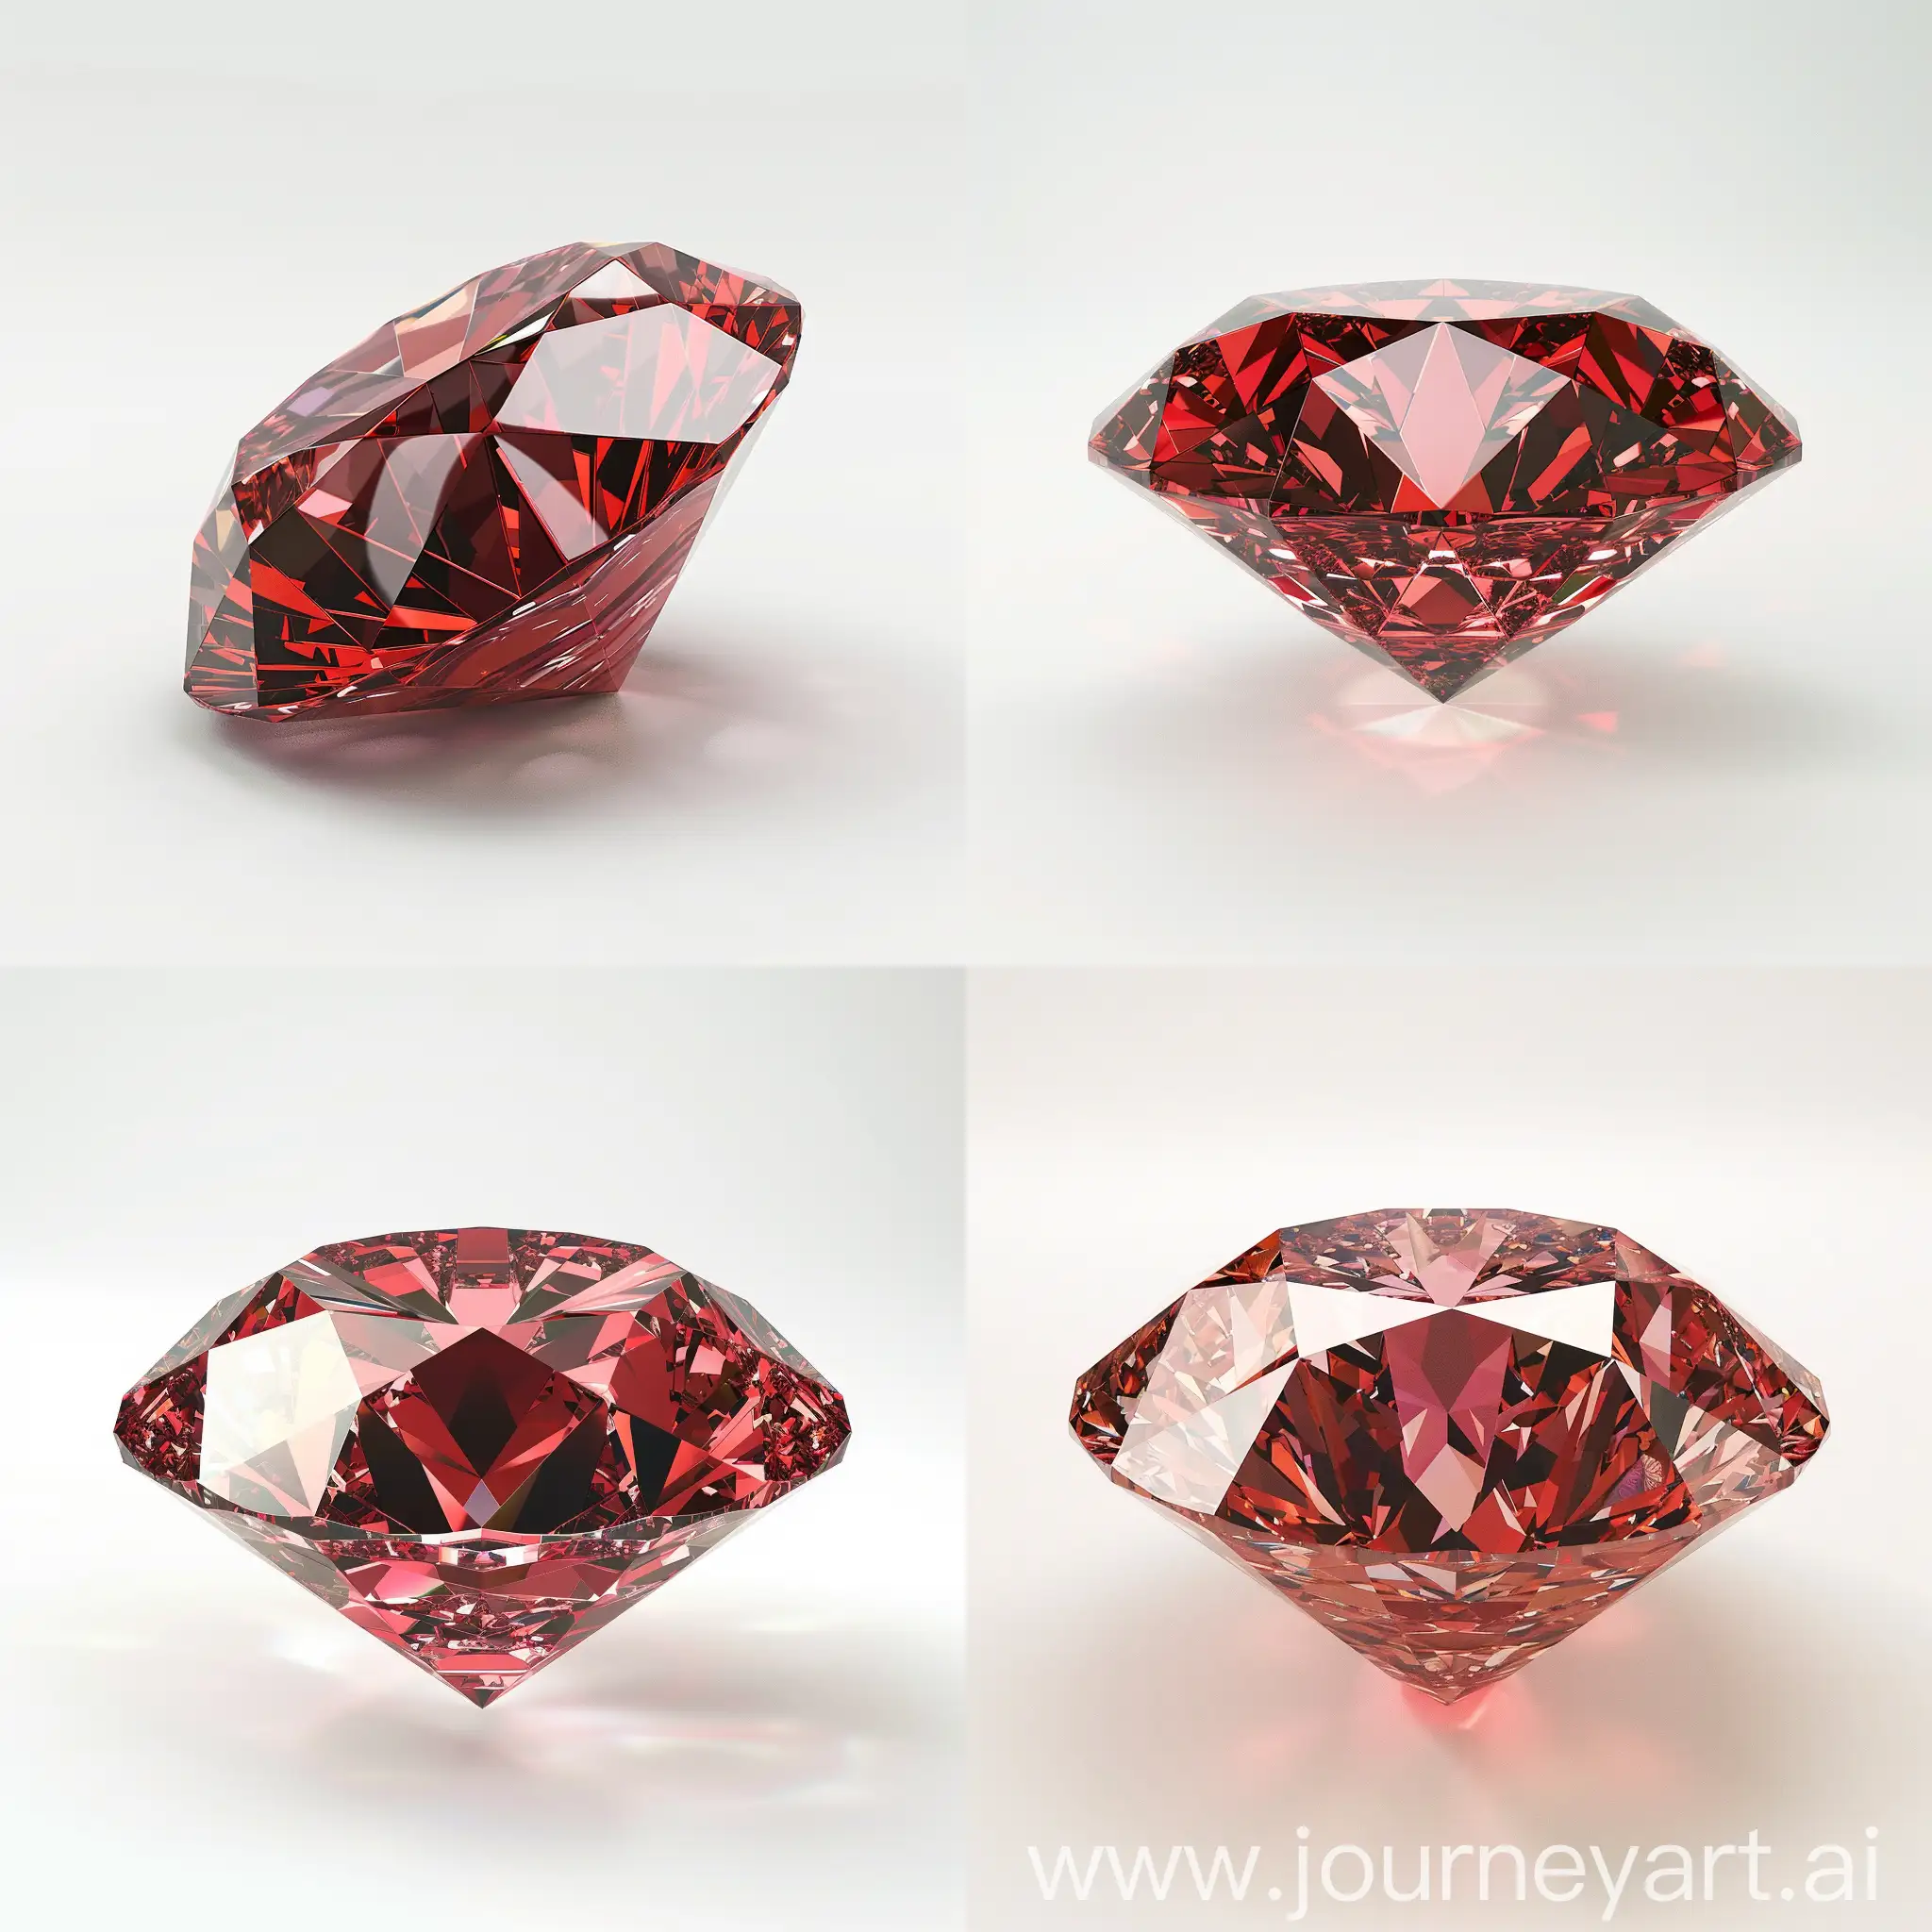 Brilliant-Red-Diamond-on-White-Background-in-3D-Render